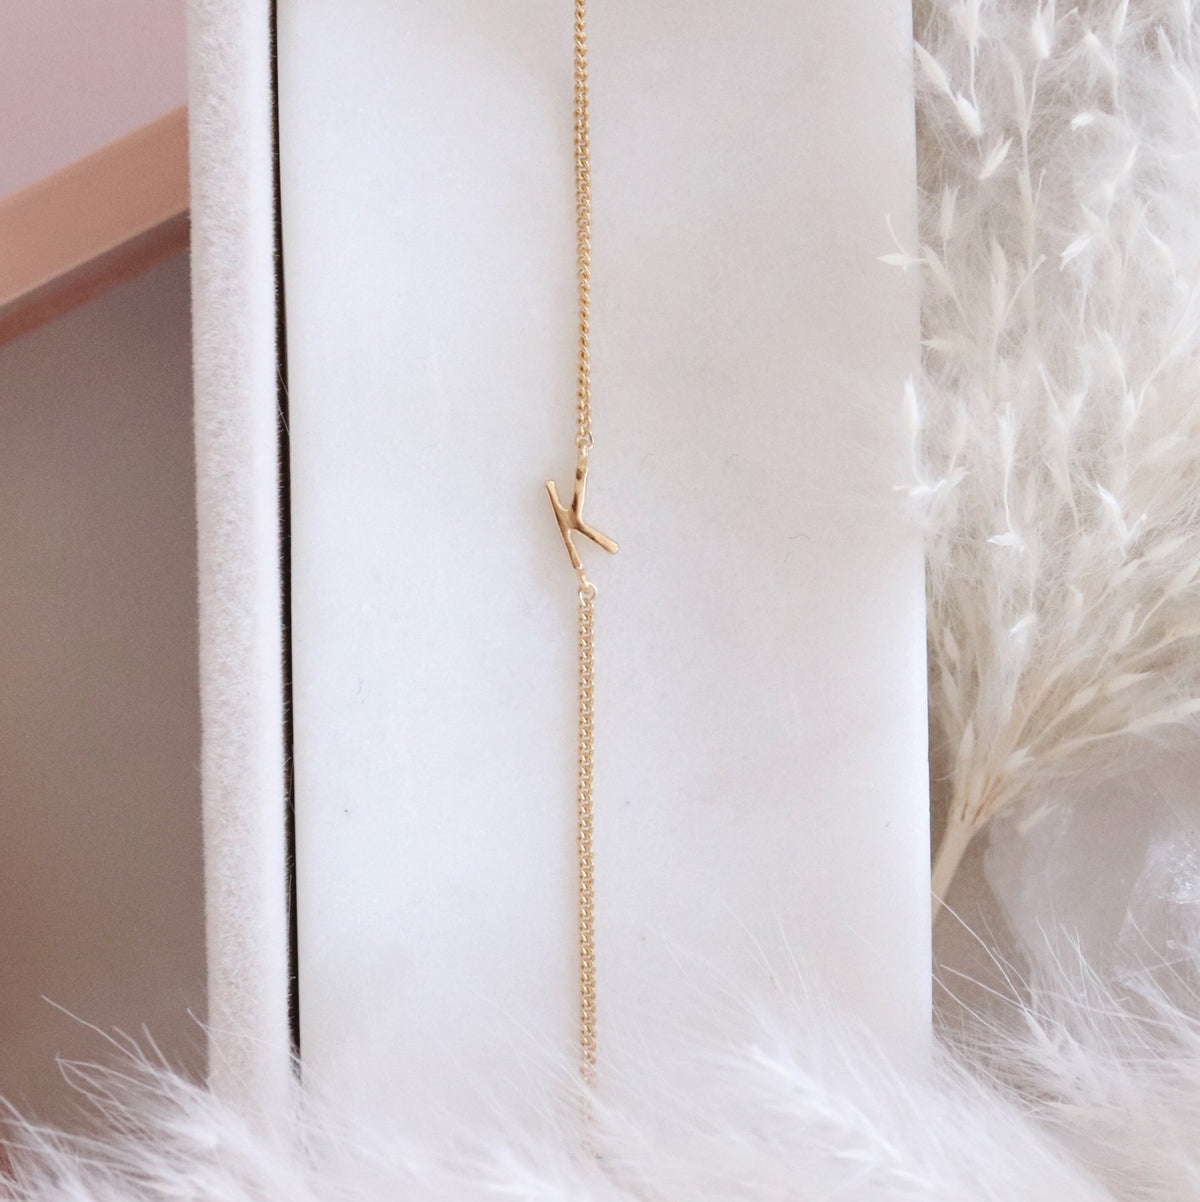 NOTABLE OFFSET INITIAL NECKLACE - K - GOLD - SO PRETTY CARA COTTER